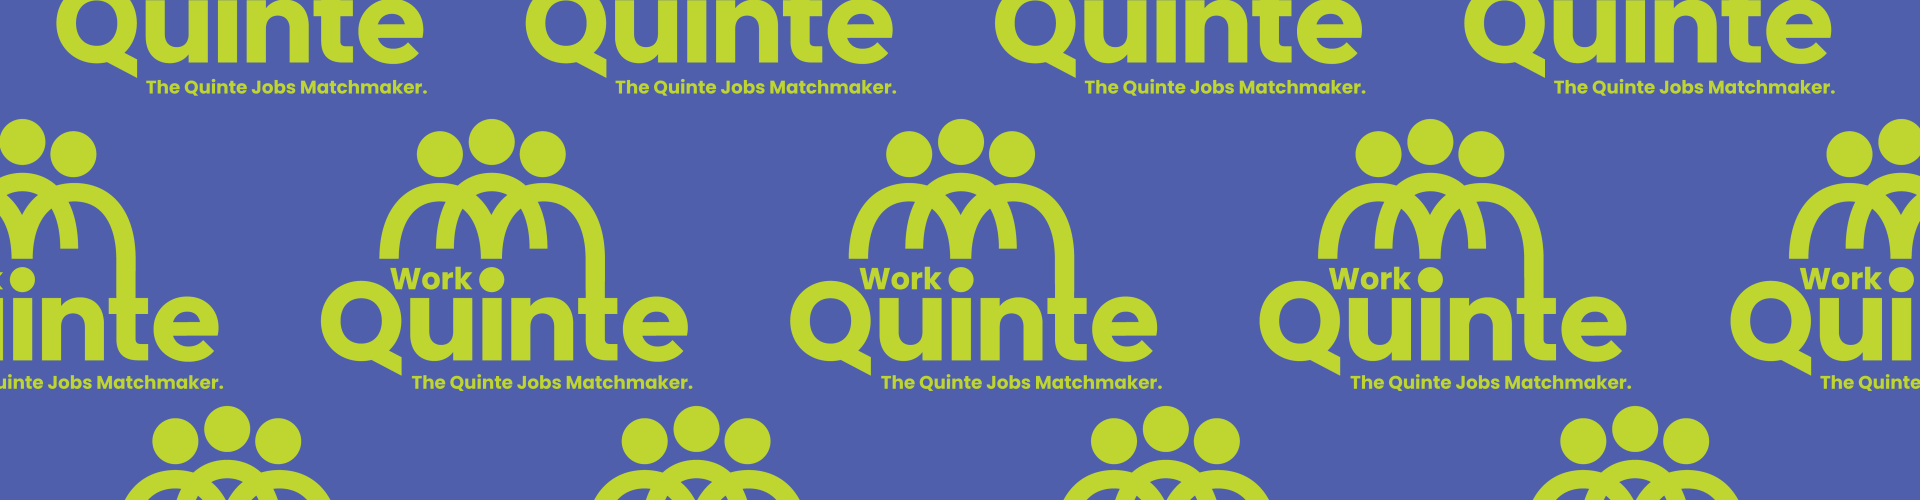 Blue background with lime green Work in Quinte logo and The Quinte Jobs Matchmaker tagline.